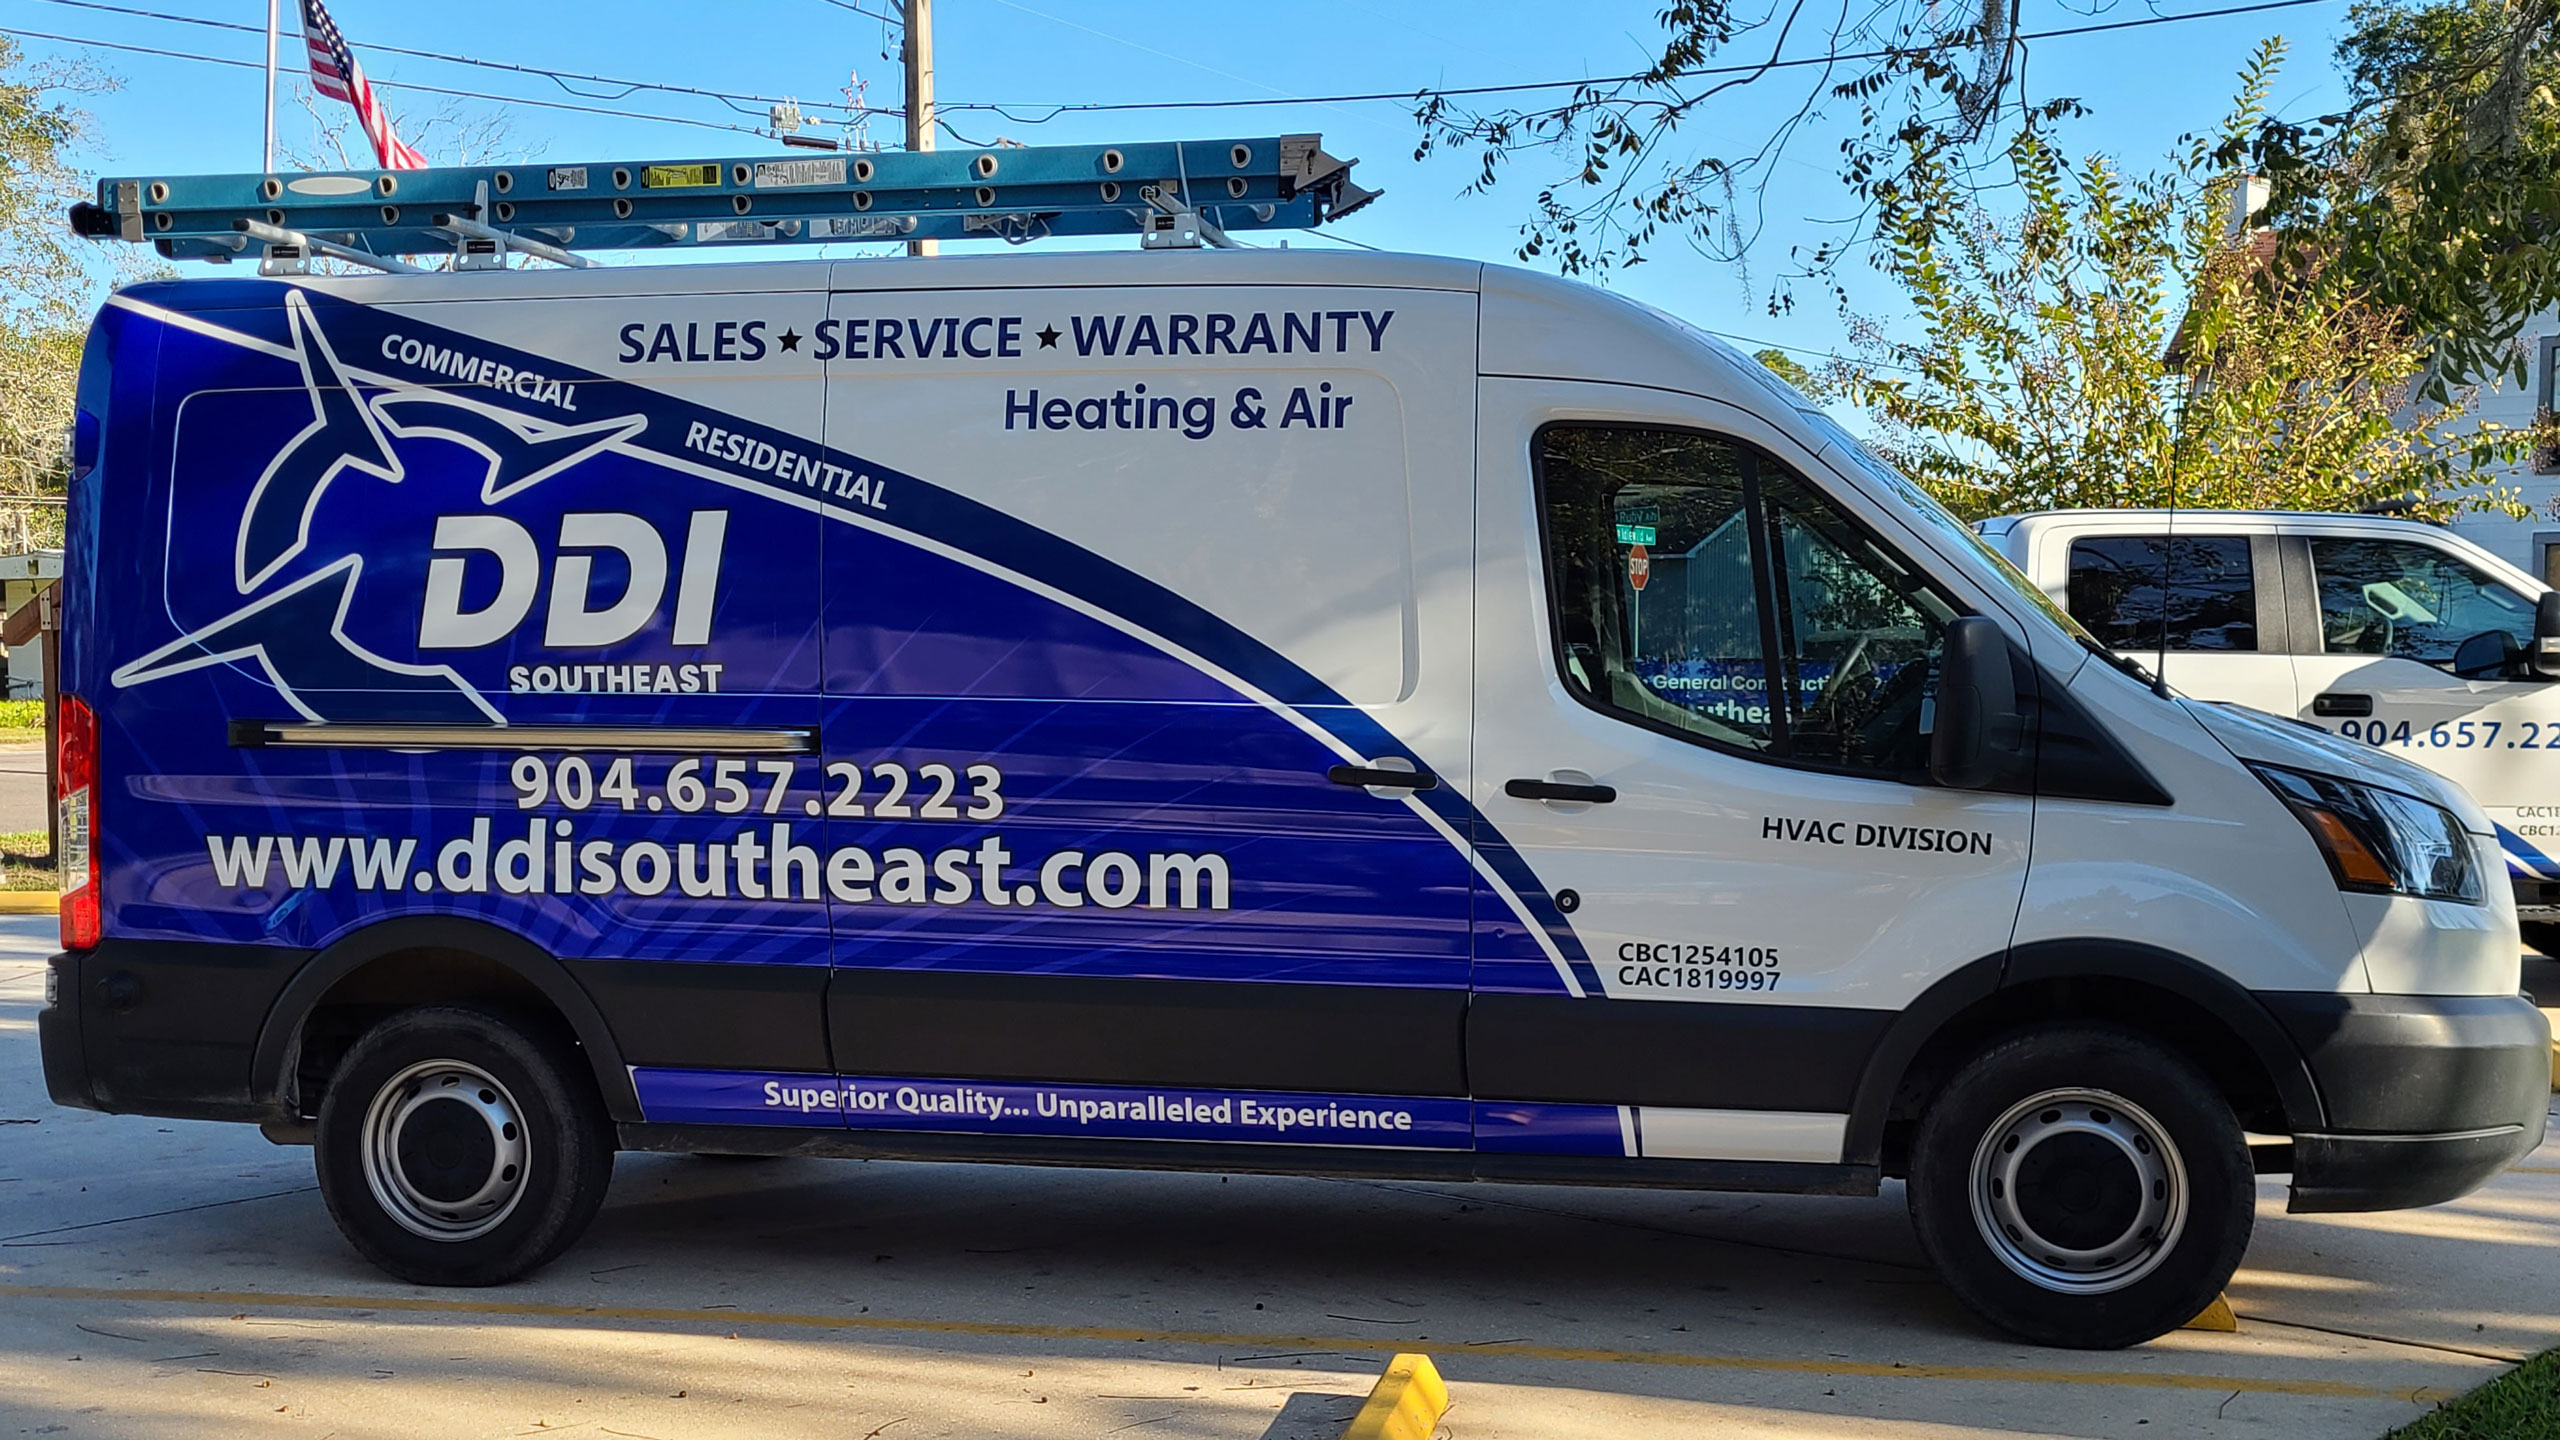 Providing Home and Business Air Conditioning Repairs and Services in the Green Cove Springs, Fleming Island and Clay County areas.